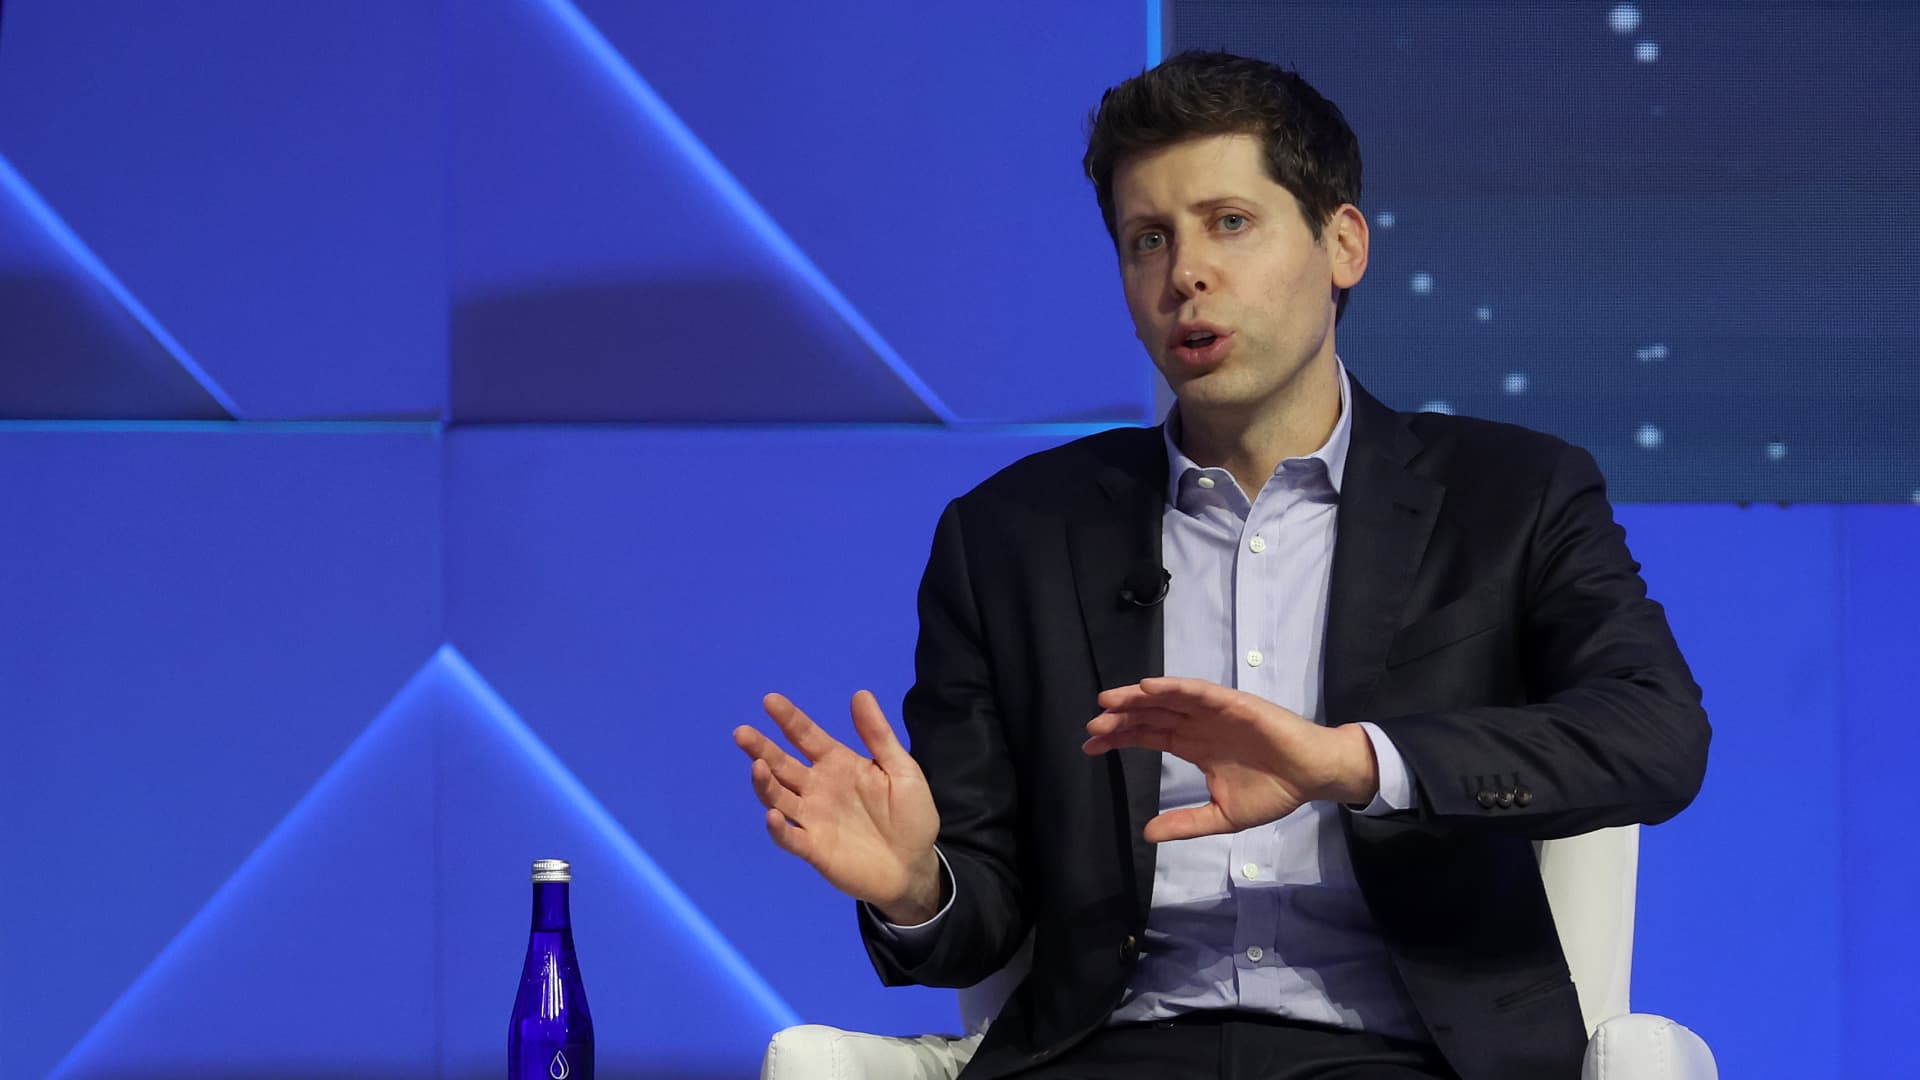 OpenAI says Sam Altman exiting as CEO because 'board no longer has confidence' in ability to lead